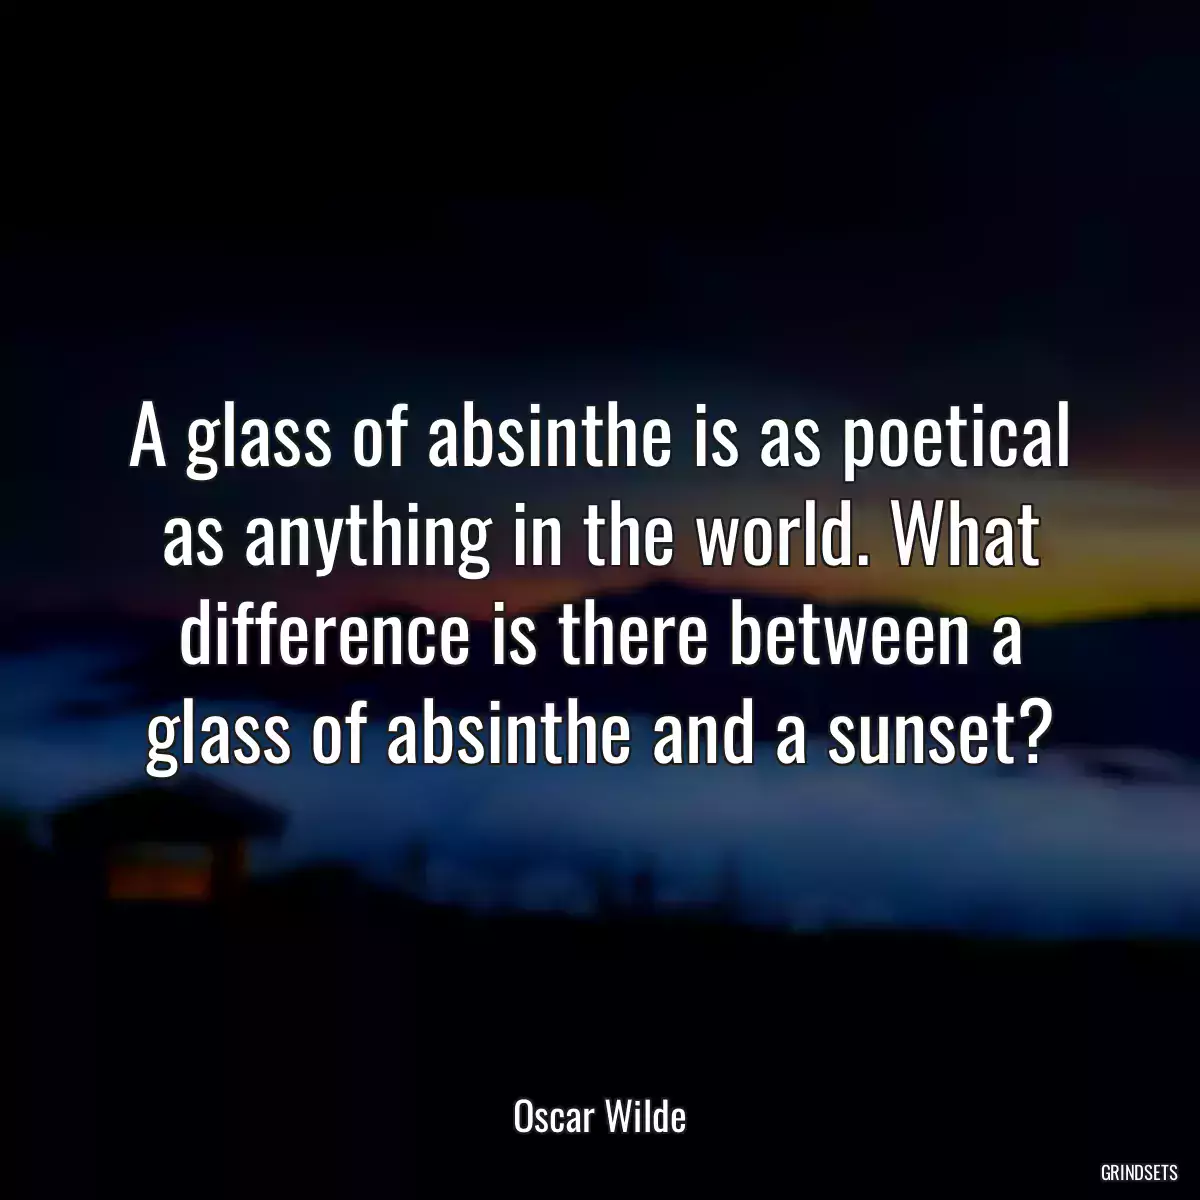 A glass of absinthe is as poetical as anything in the world. What difference is there between a glass of absinthe and a sunset?